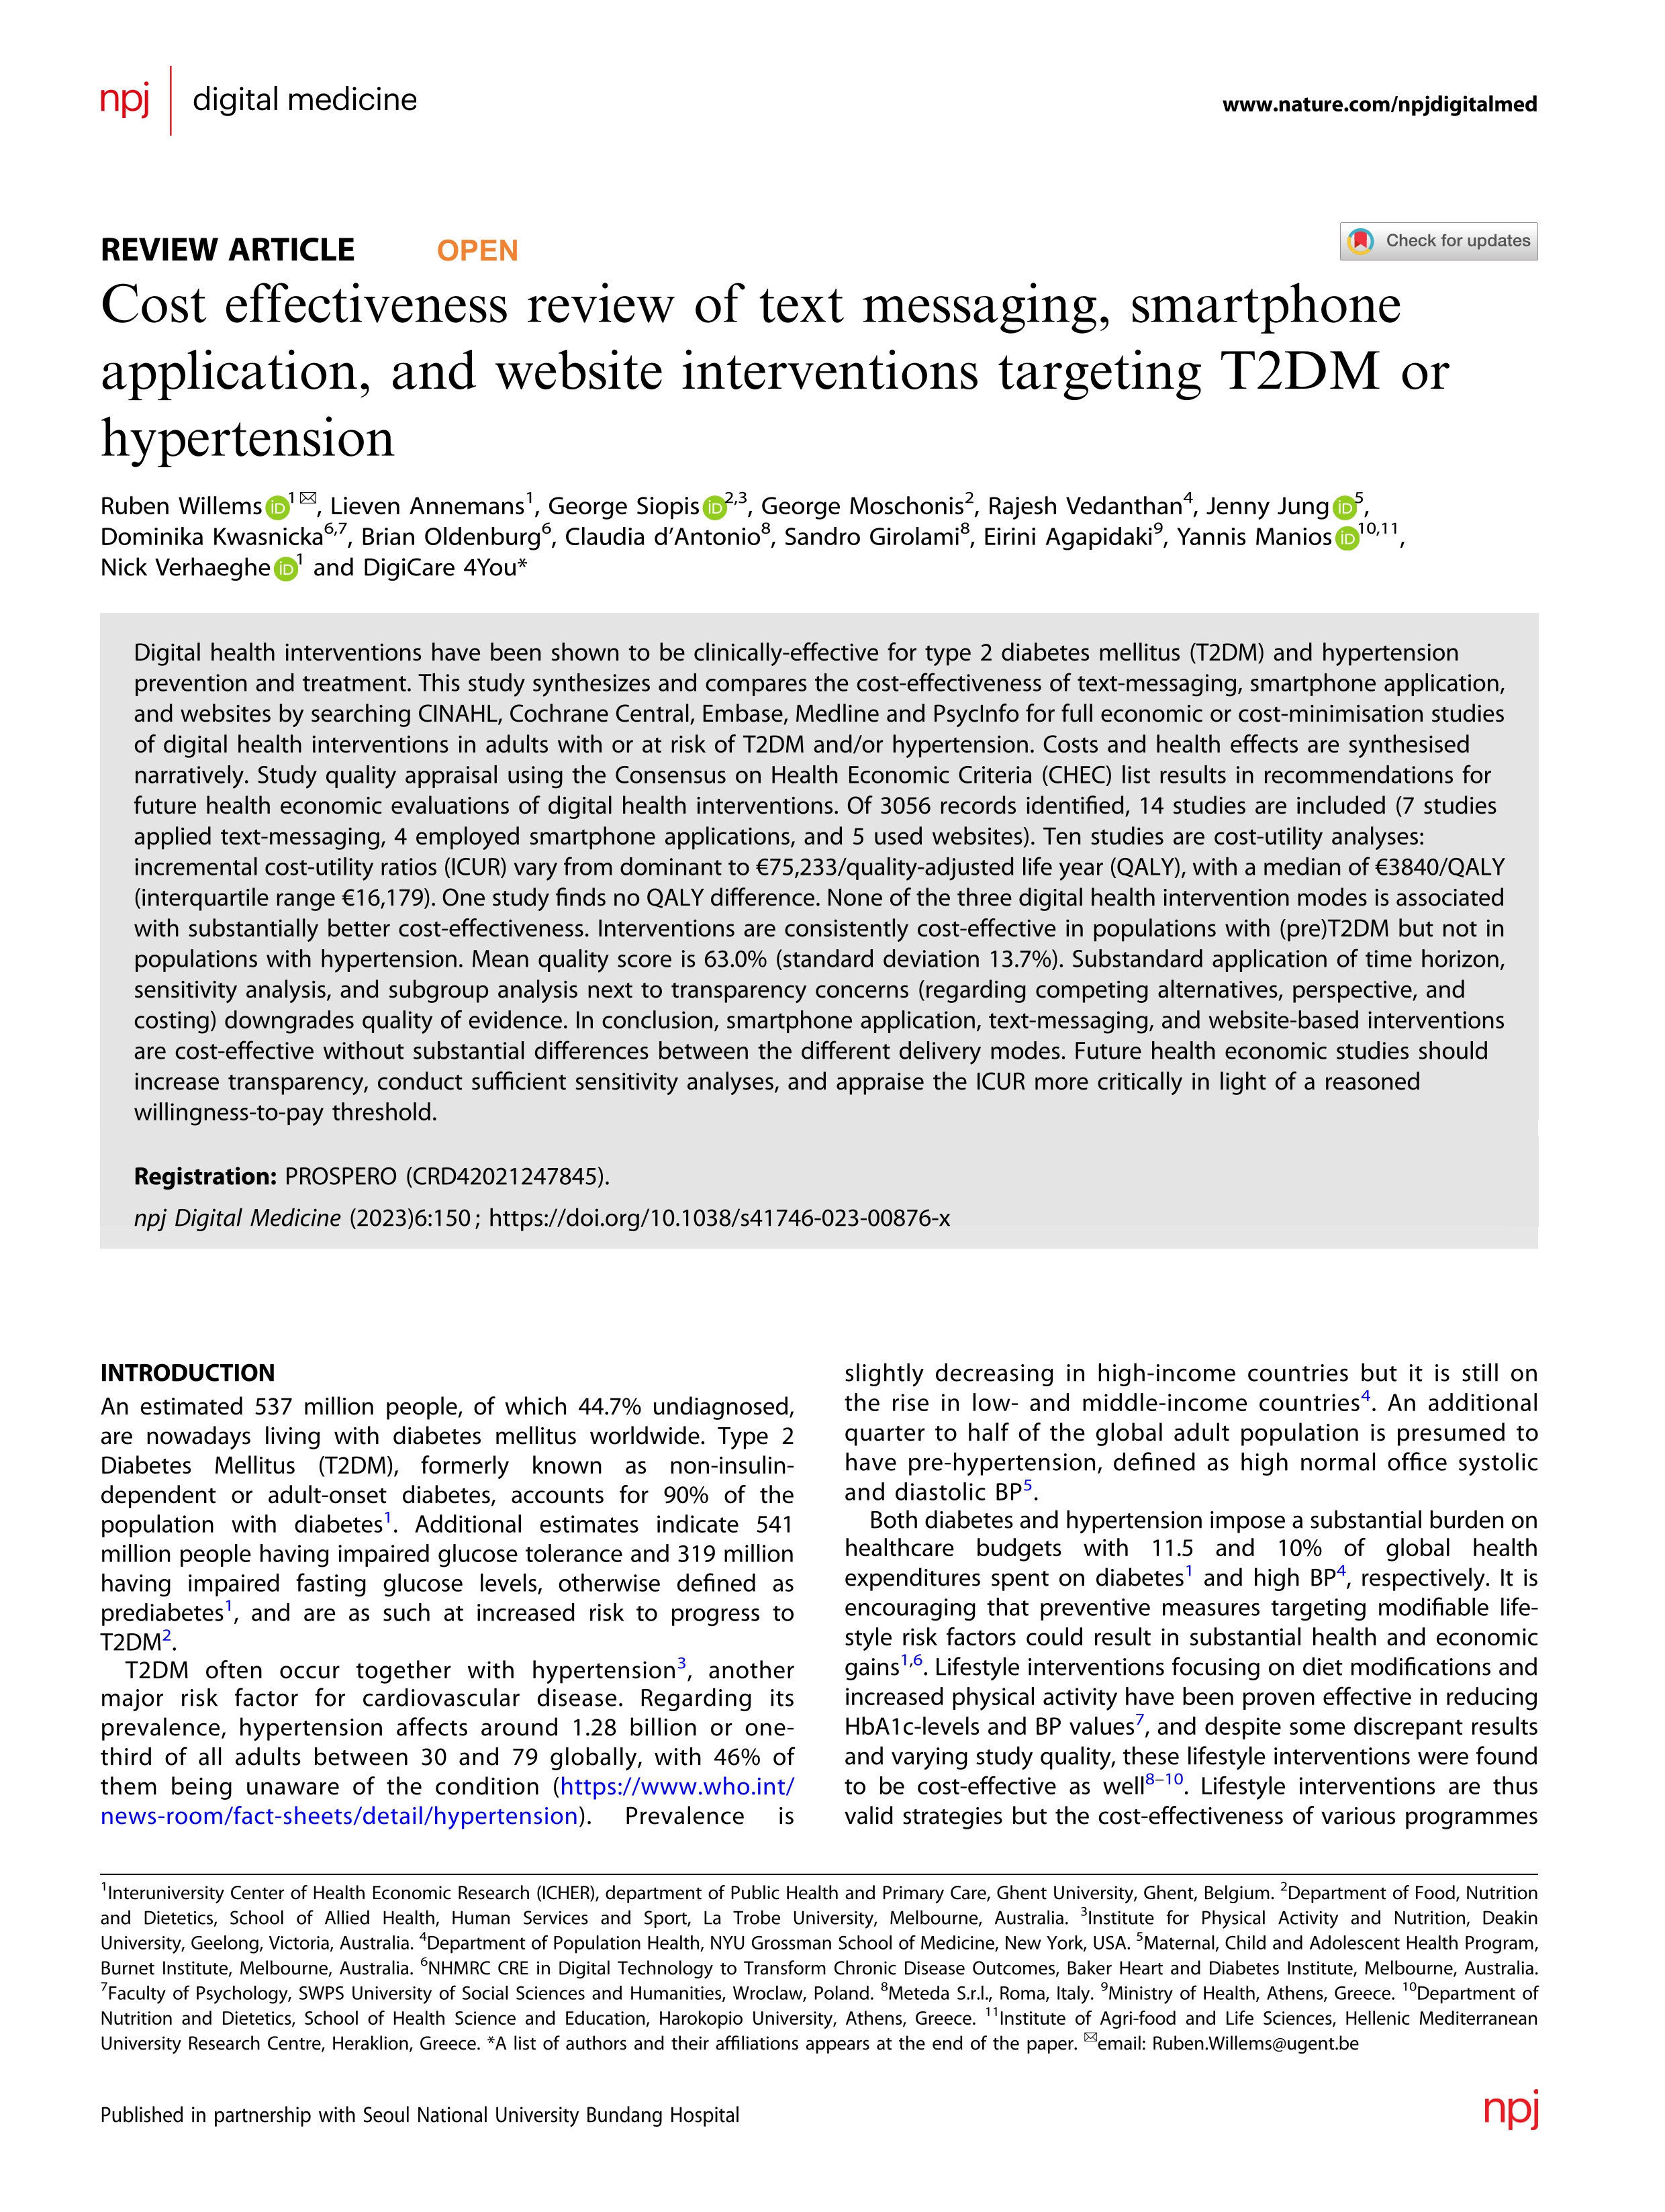 Cost effectiveness review of text messaging, smartphone application, and website interventions targeting T2DM or hypertension